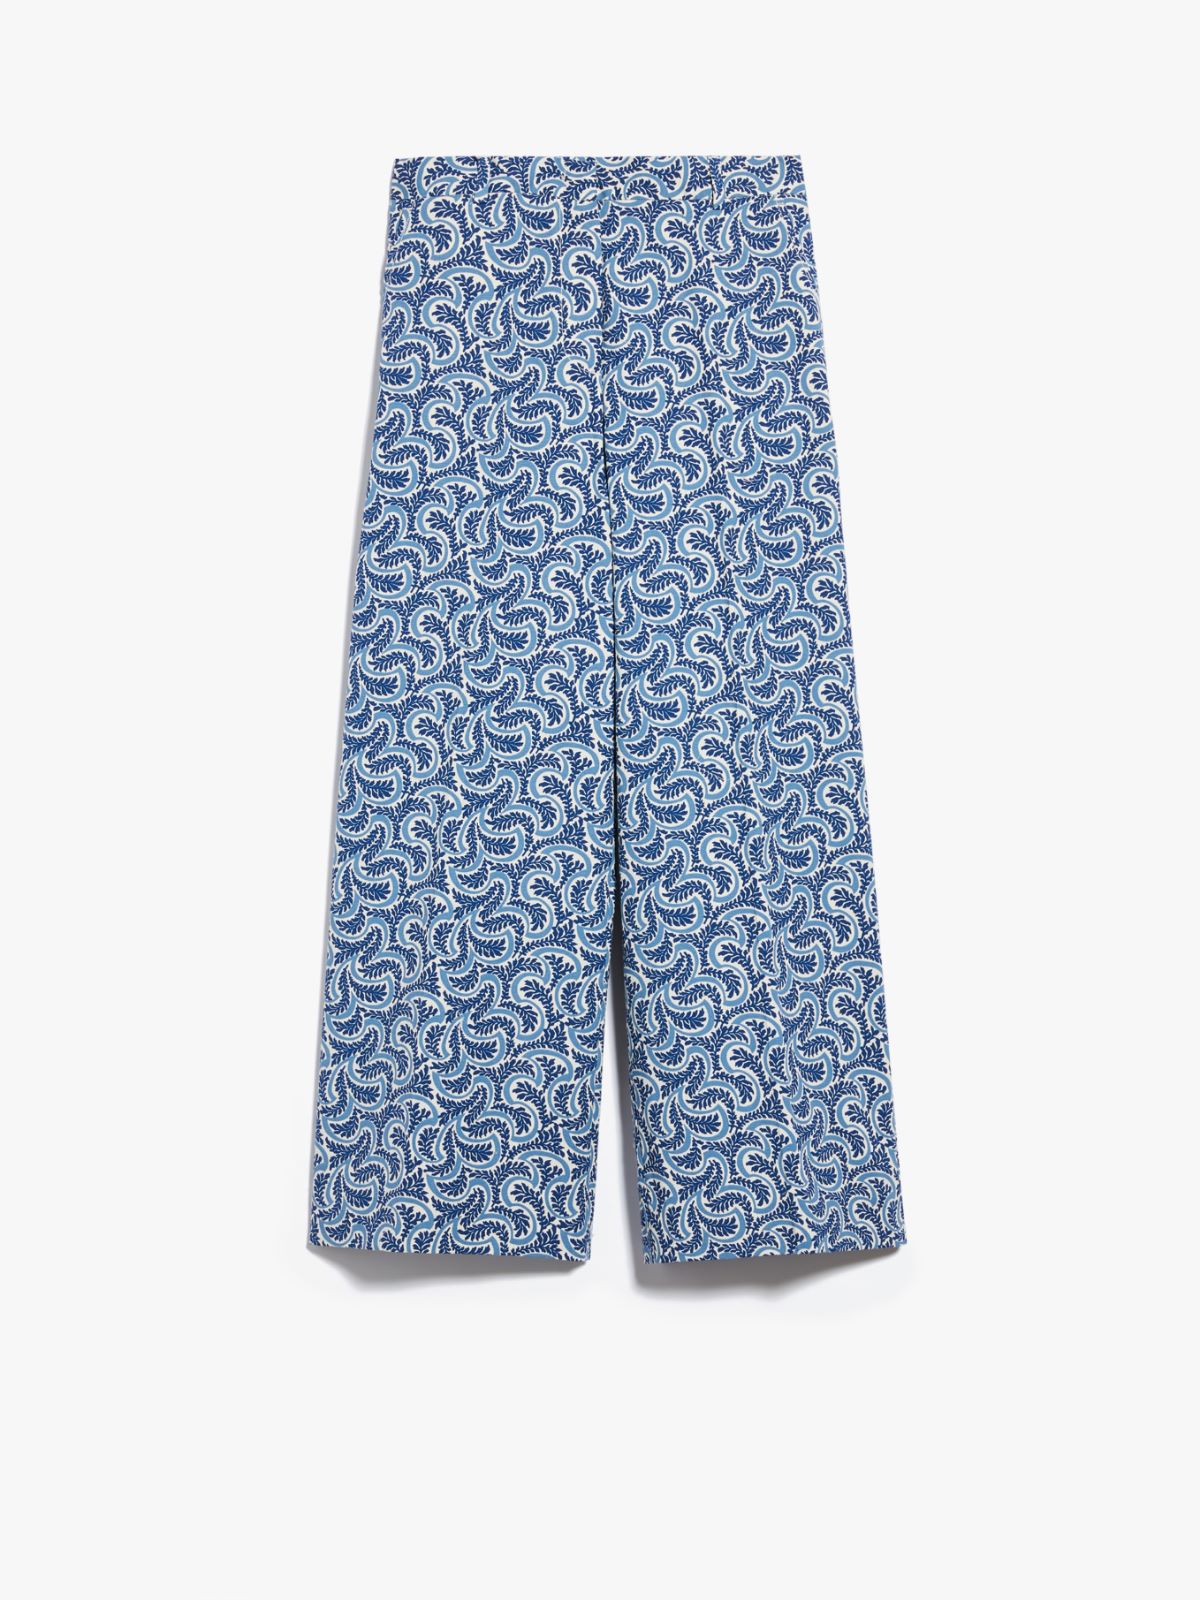 Trousers in printed cotton - LIGHT BLUE - Weekend Max Mara - 5